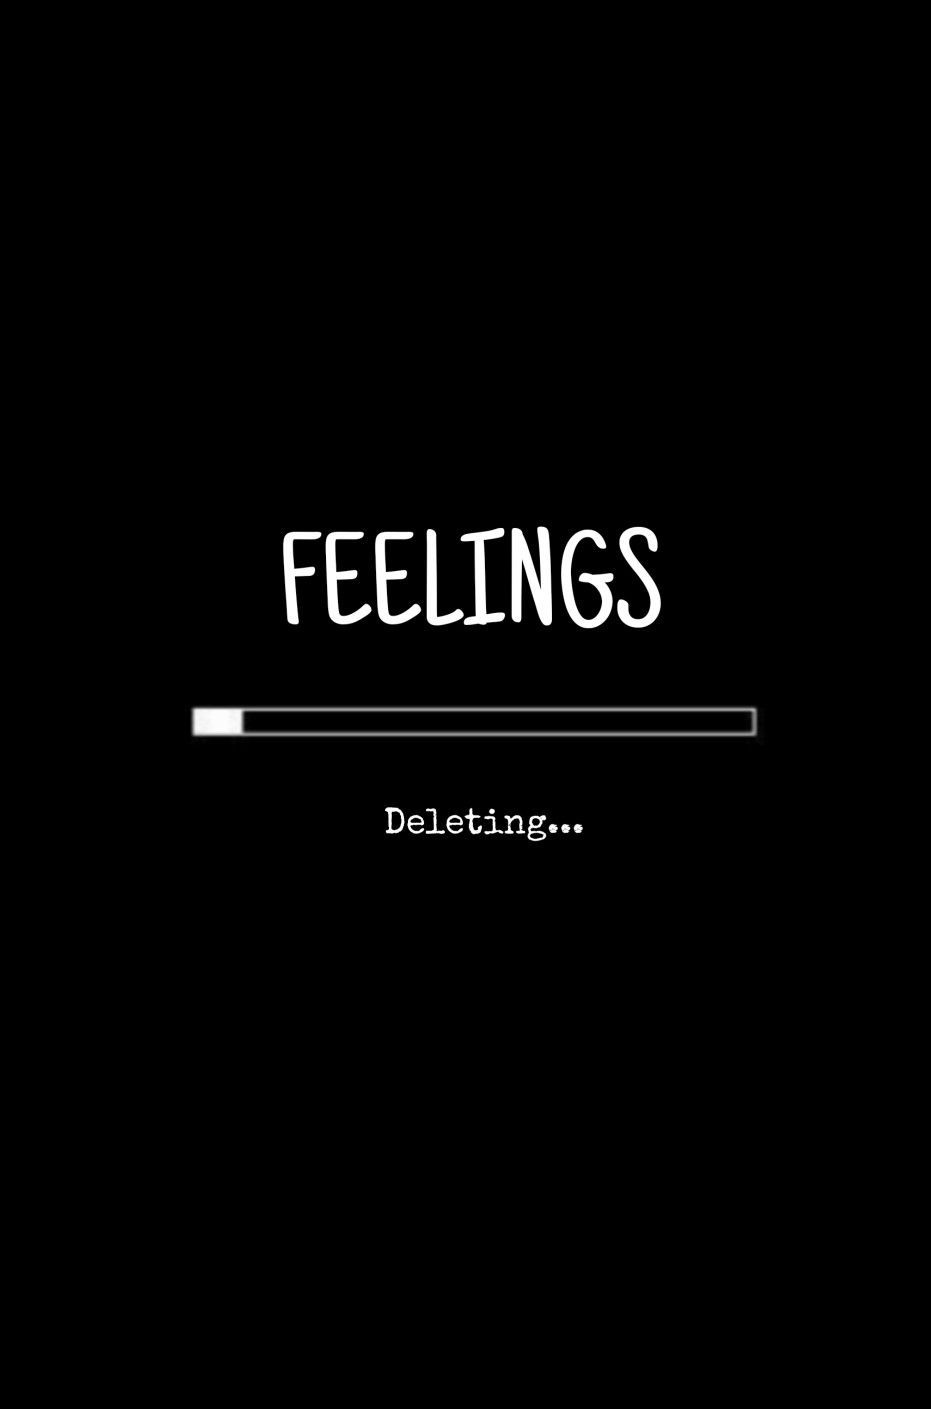 The Feeling Wallpapers